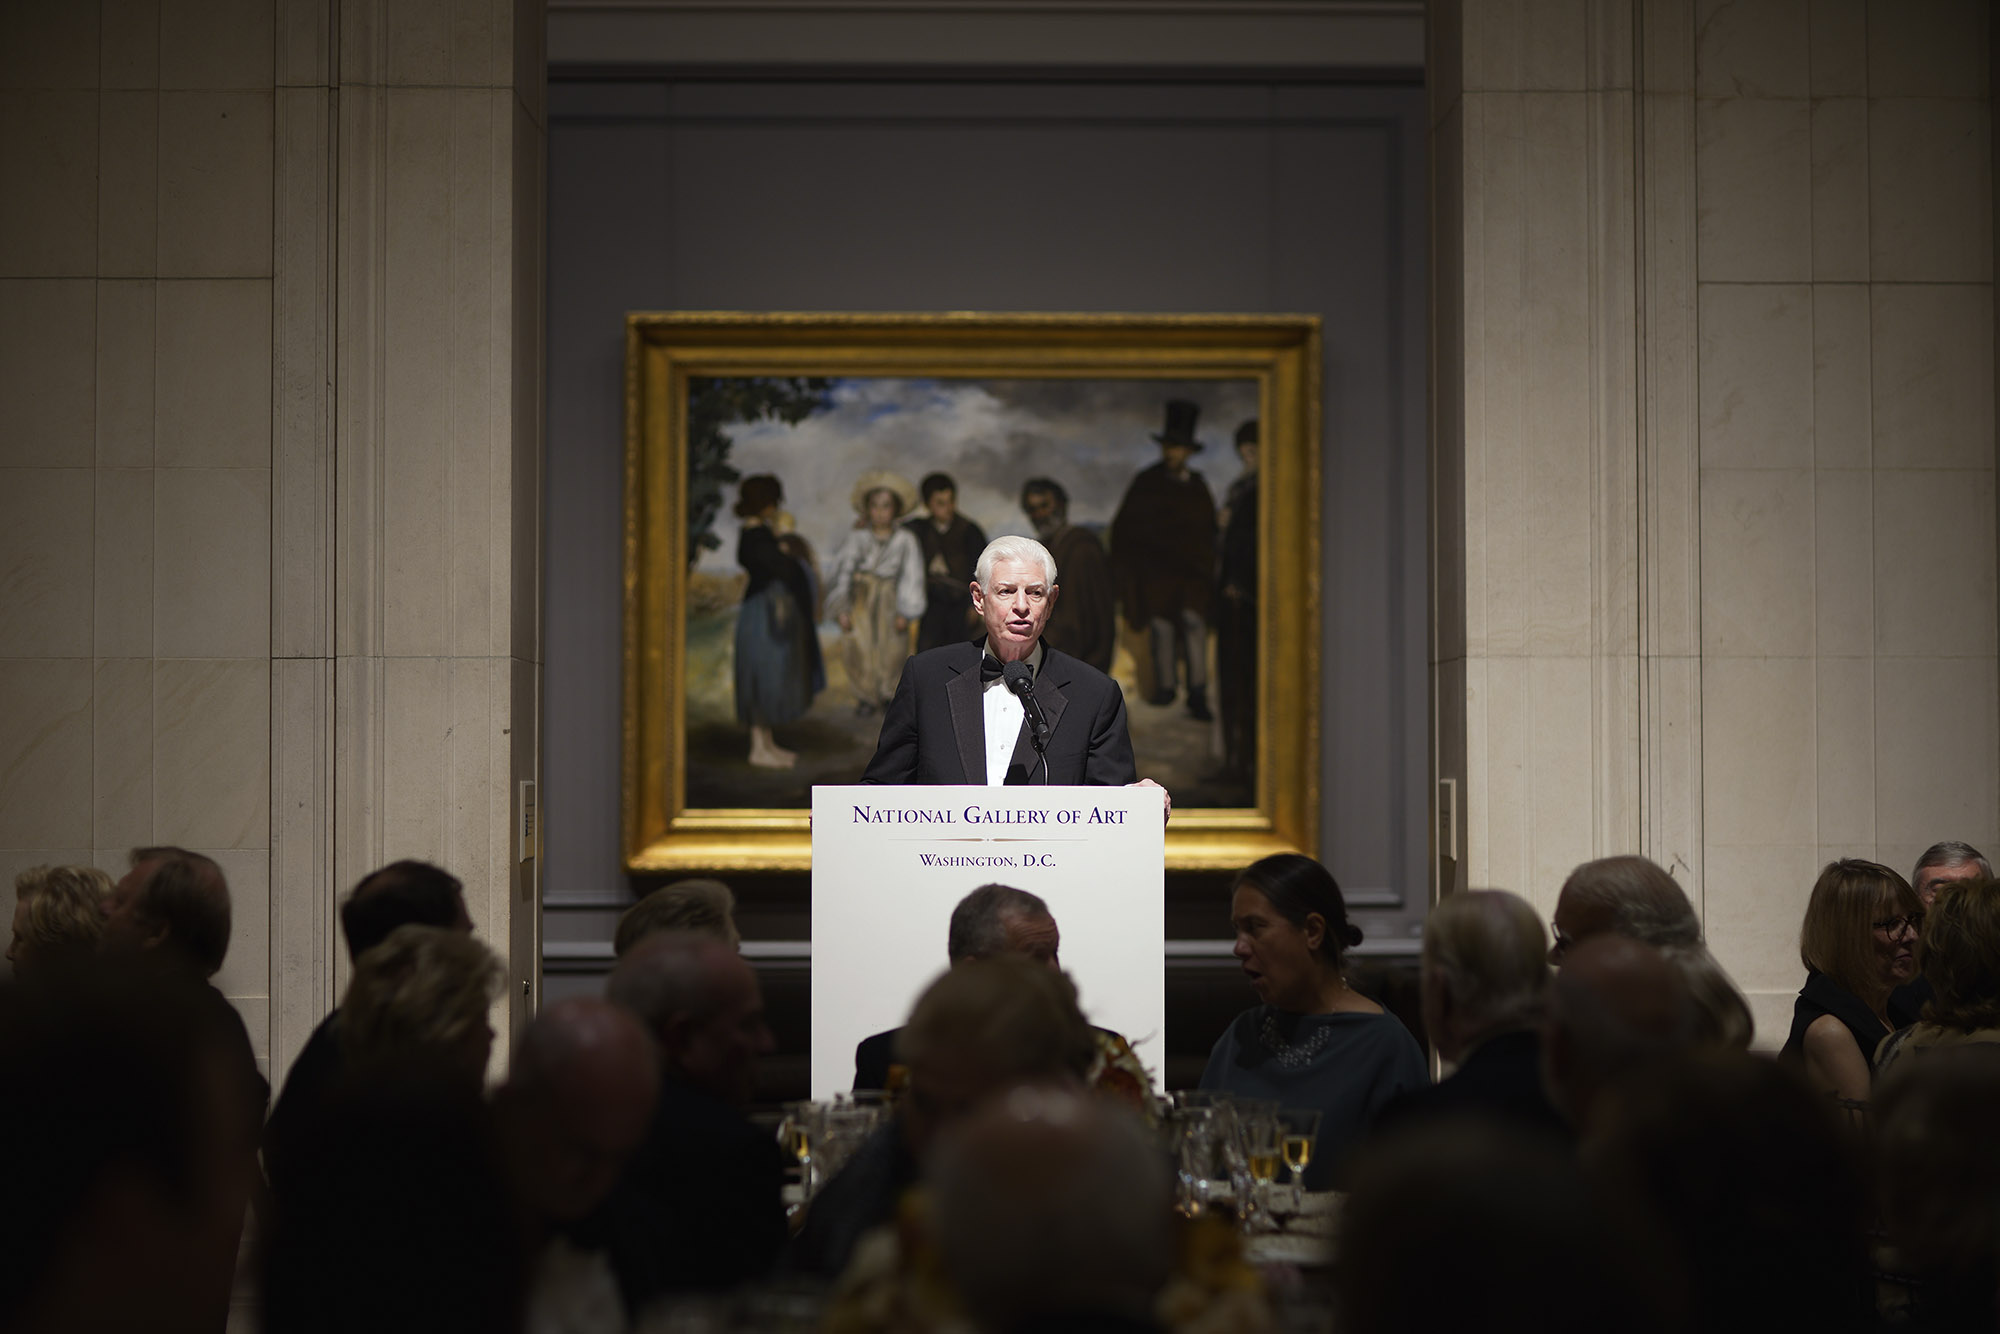 Beinecke stands at a podium giving a speech at the National Gallery of Art